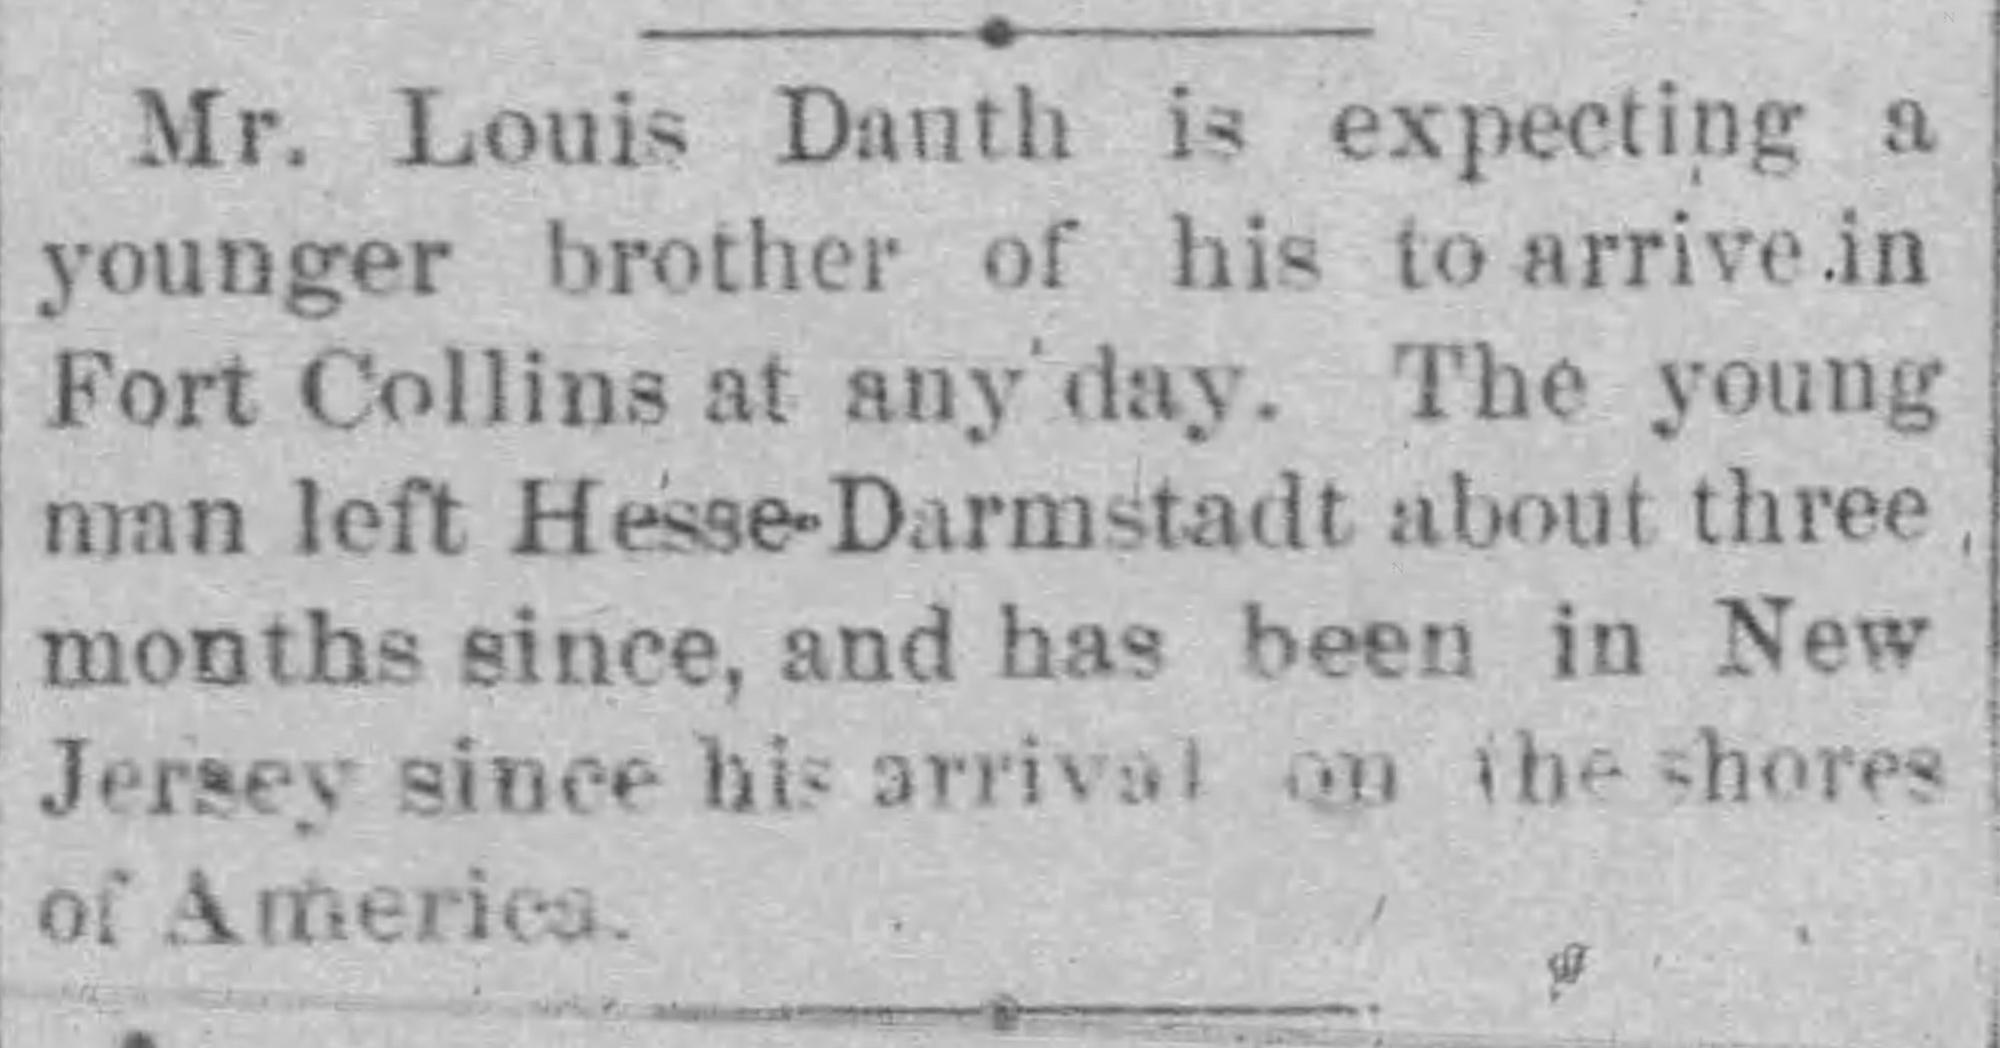 Dauth Family Archive - 1882-08-28 - Daily Evening Courier - Phillip Dauth Traveling to Fort Collins